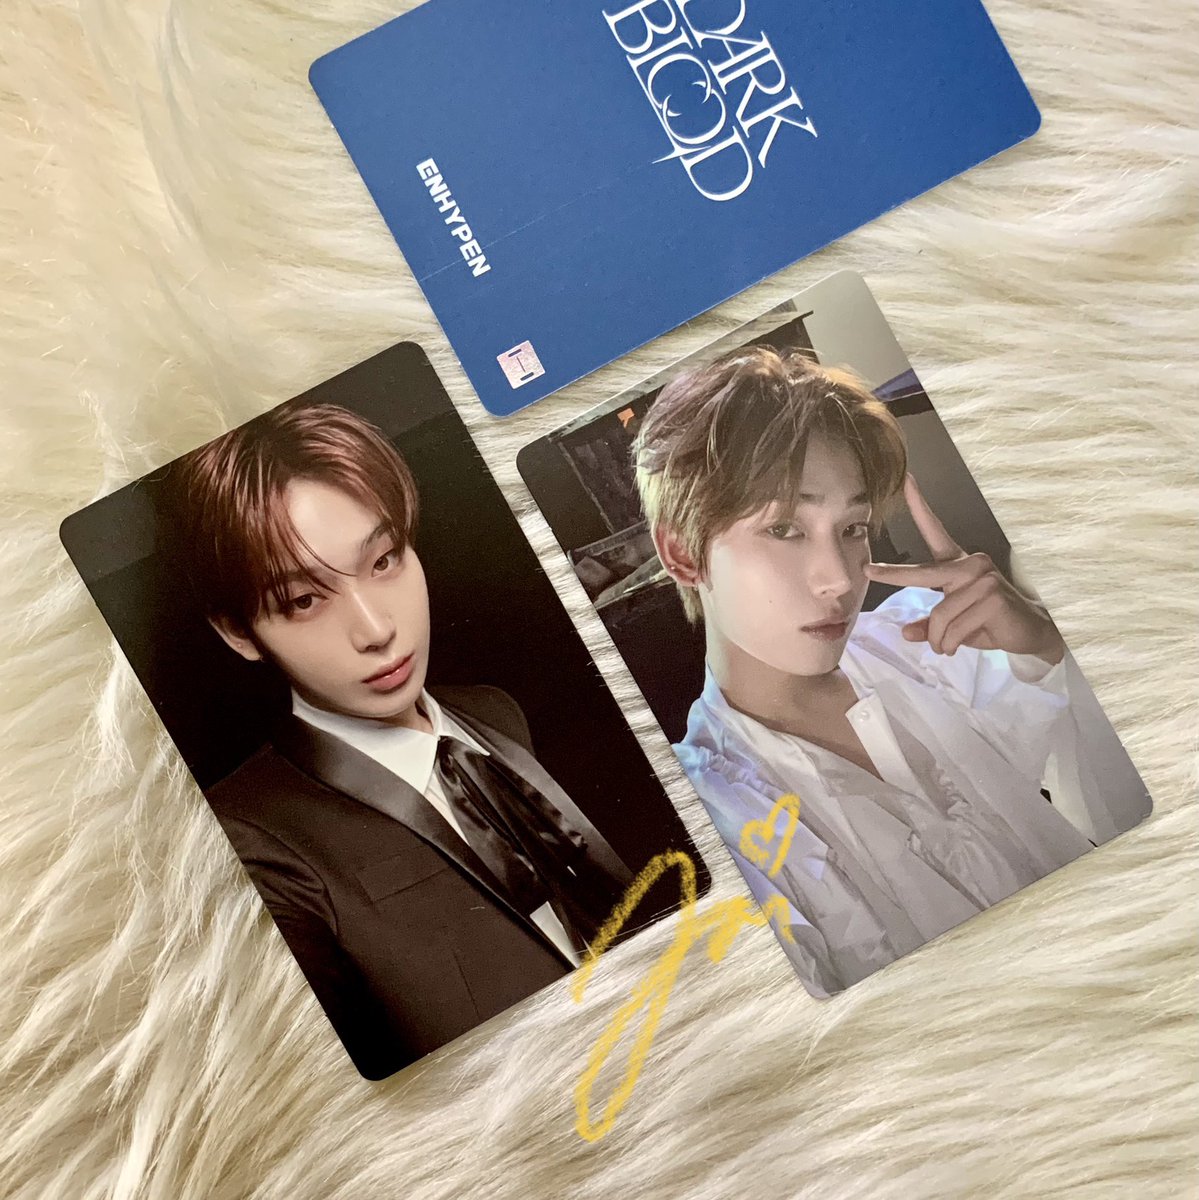 anyone inch with these pcs?
will do small set for EACH ld probably 1k each set

wts lfb ph
sunoo pst and sw ld

t. enhypen dark blood db lucky draw soundwave powerstation r1 round 1